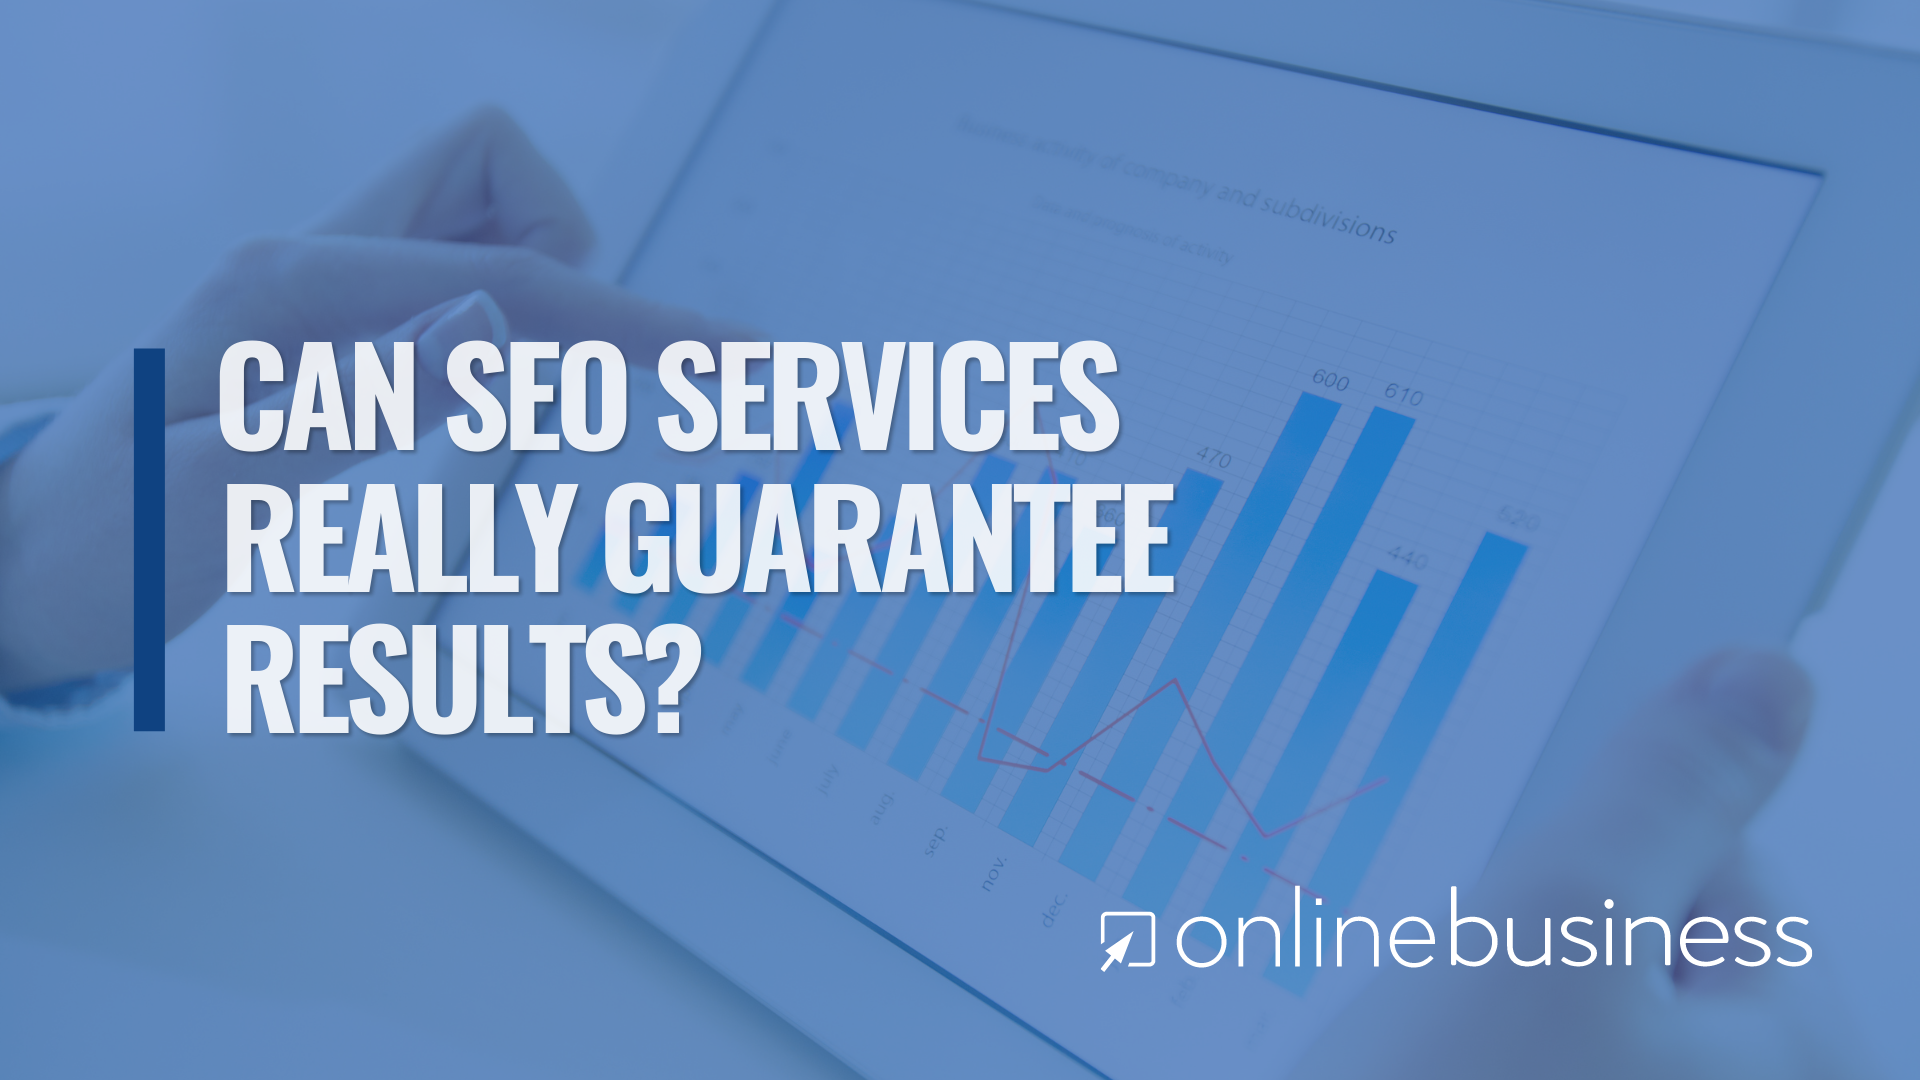 OnlineBusiness.com Discusses the Controversial Topic of Guaranteed SEO Services